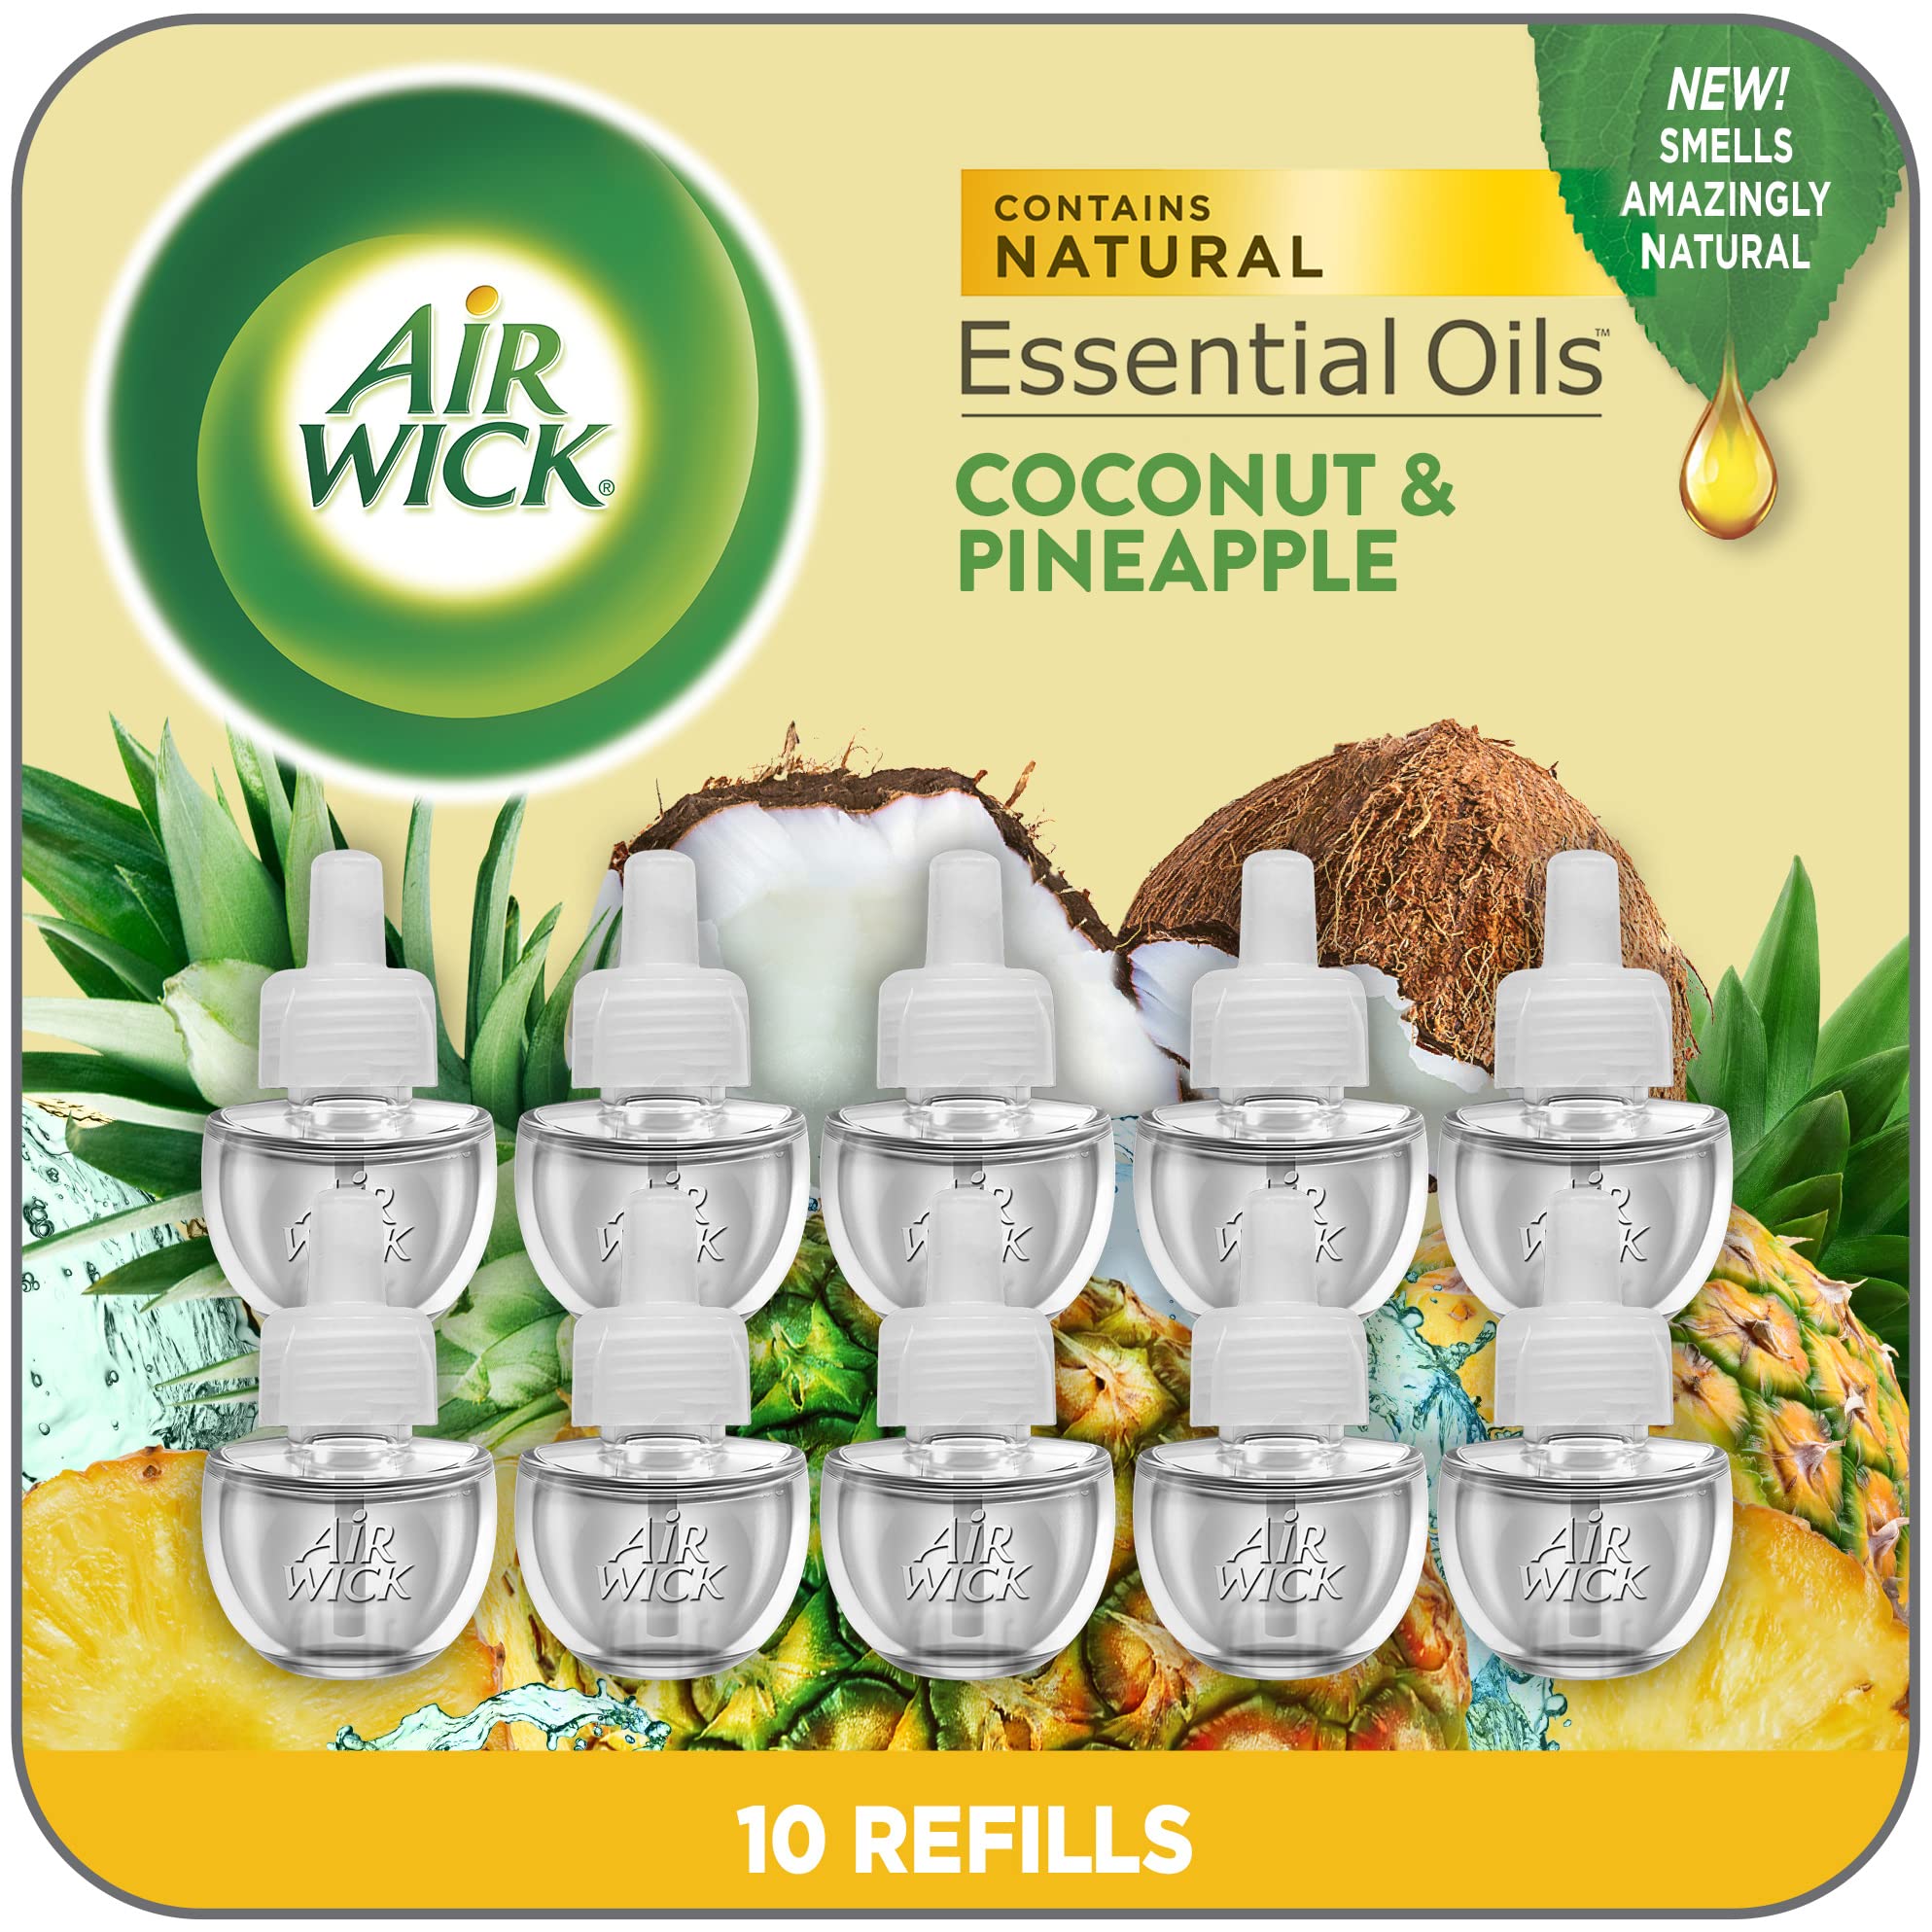 Air Wick Plug in Scented Oil Refill, 10ct, Coconut & Pineapple, Air Freshener, Essential Oils, Eco Friendly